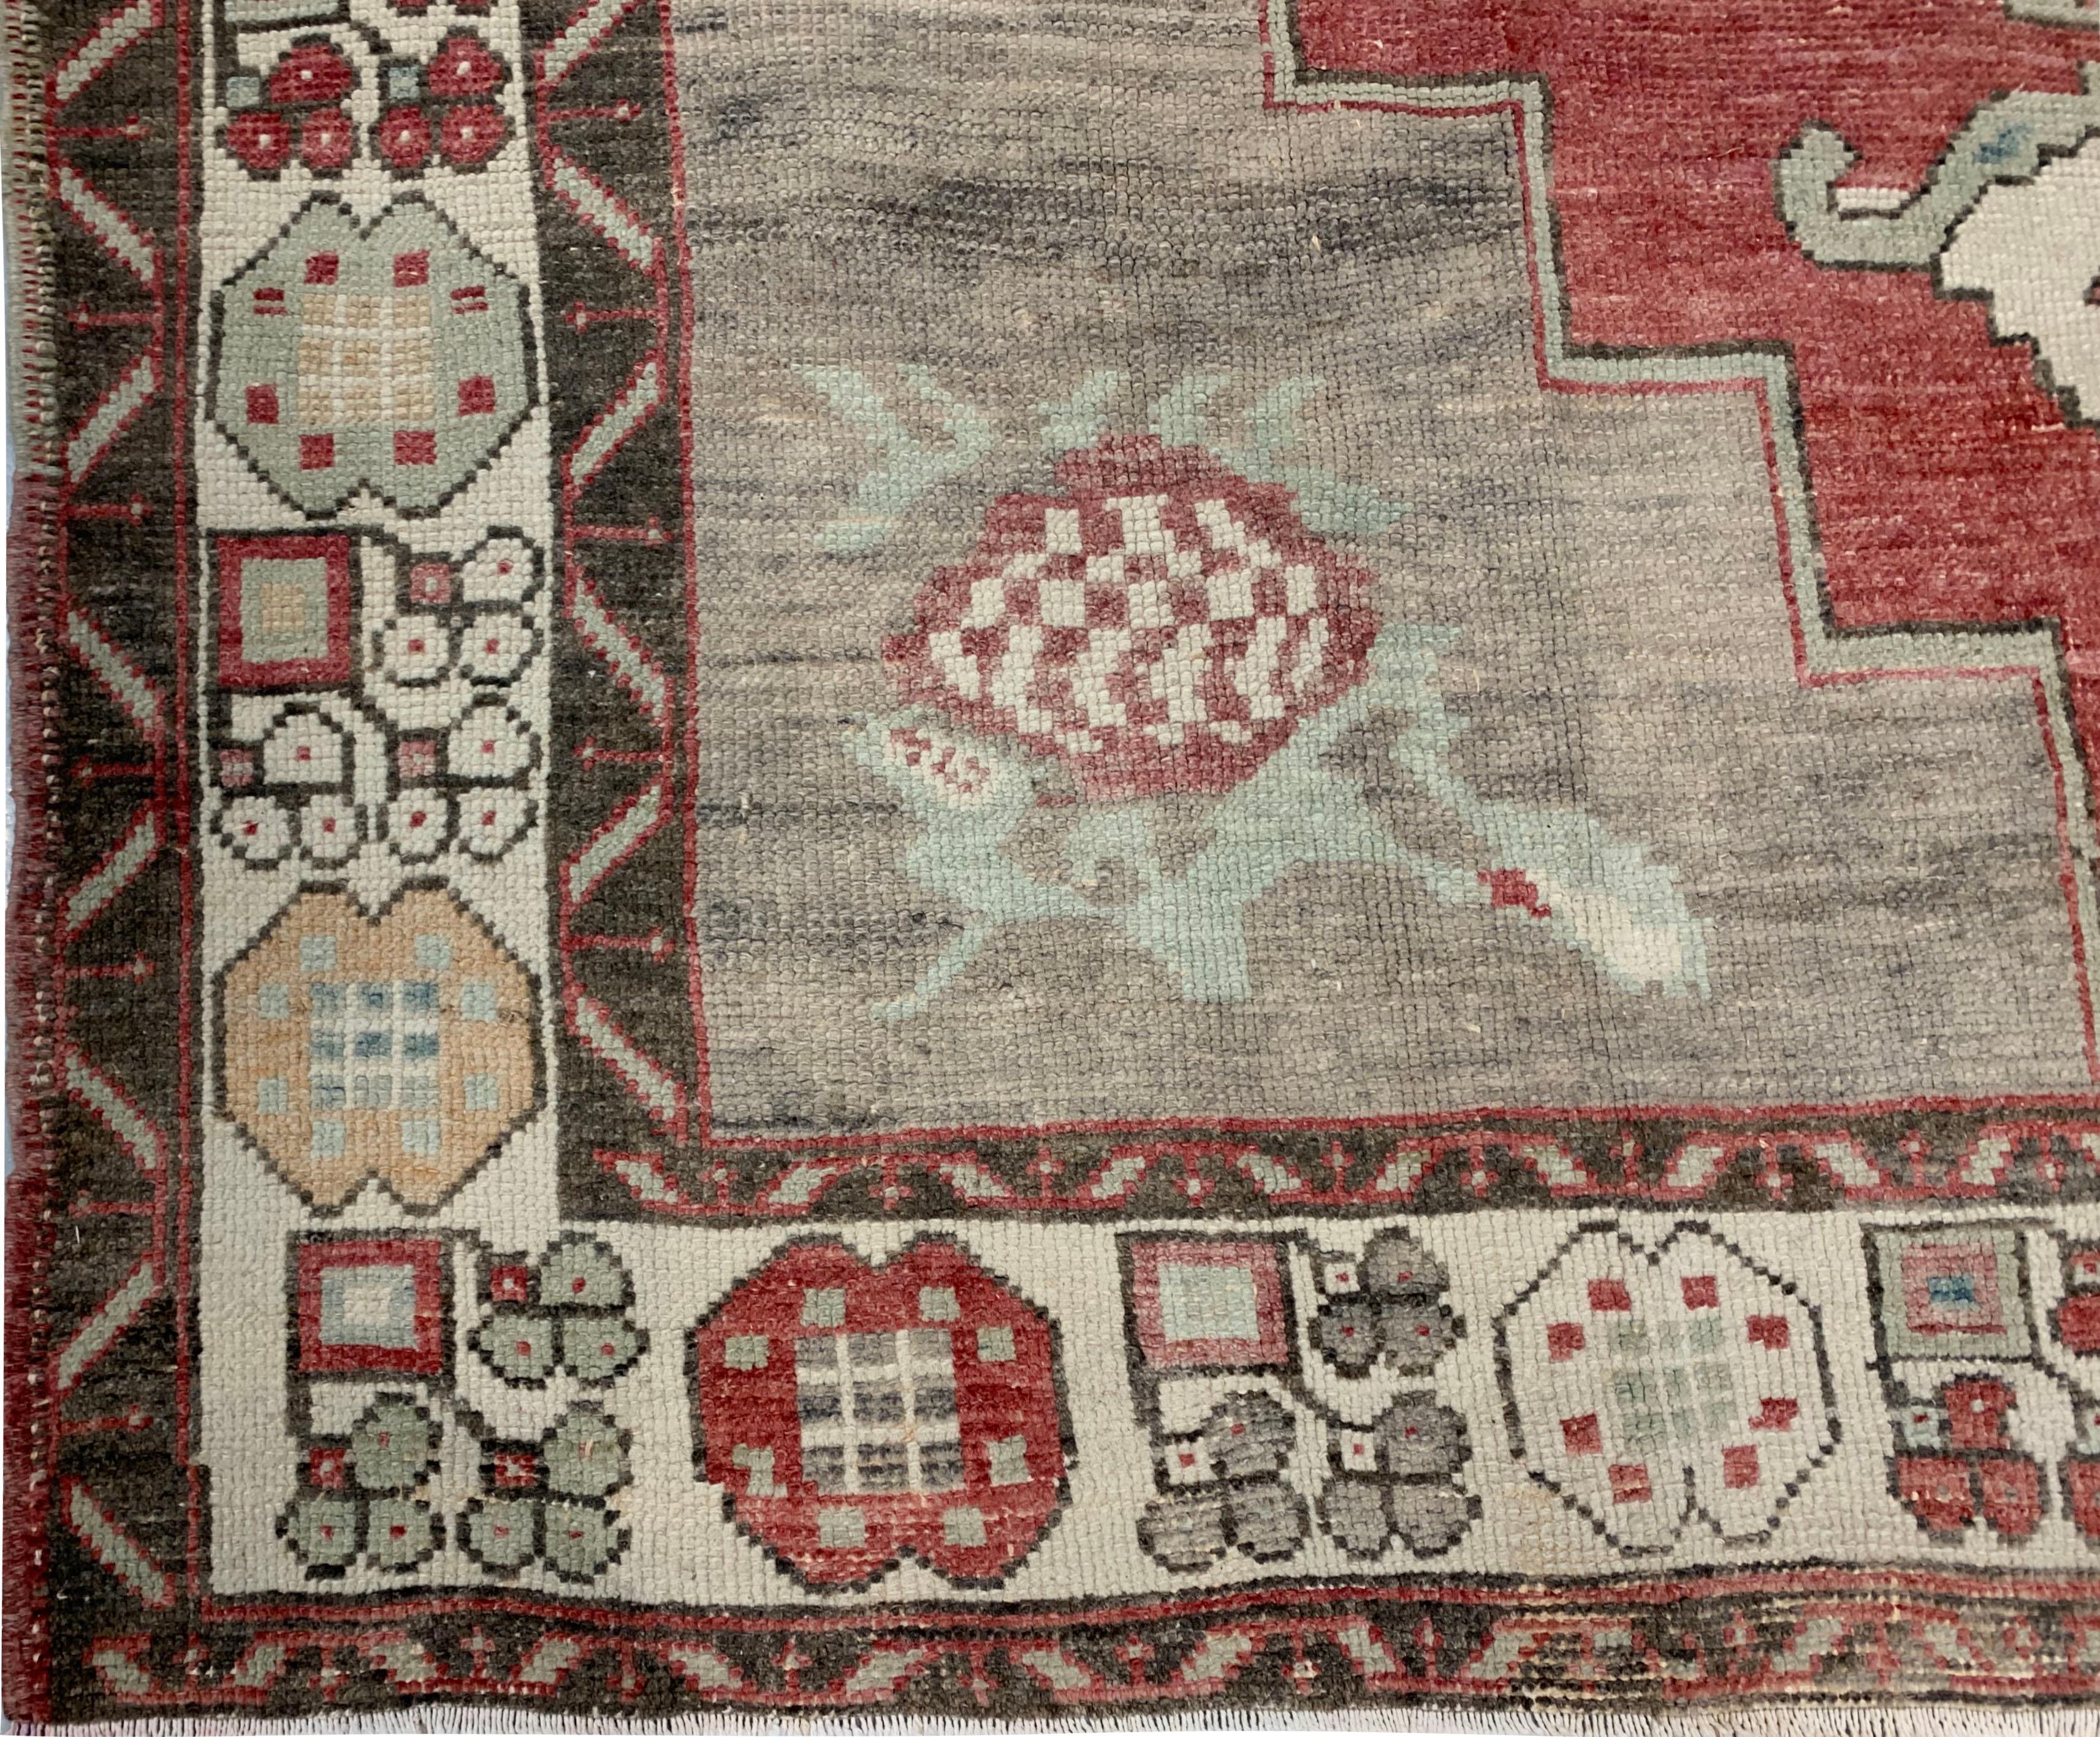 Turkish rug Runner, 5'8 x 12'. Oushak's are known for their soft palettes combined with eccentric drawing. Oushak in western Turkey has the longest continuous rug weaving history, stretching back at least to the mid-fifteenth century. It has always